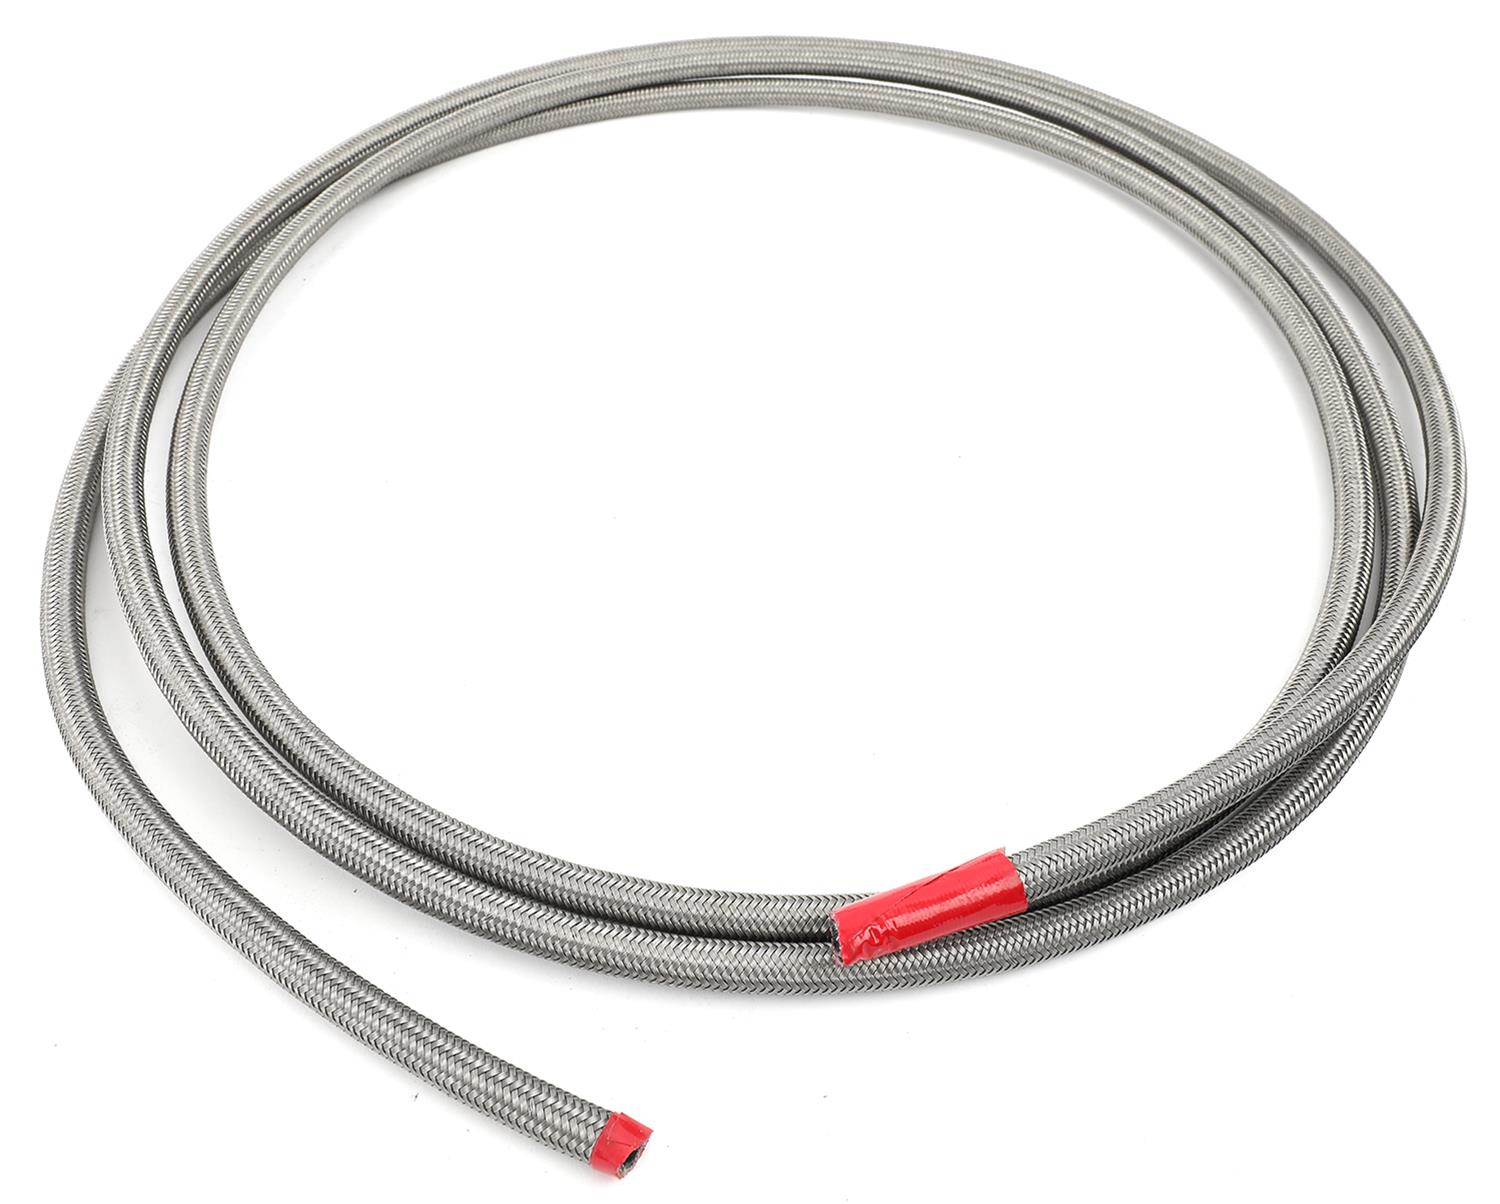 Aeromotive Hose, Fuel, Stainless Steel Braided, AN-10 x 12' 15709